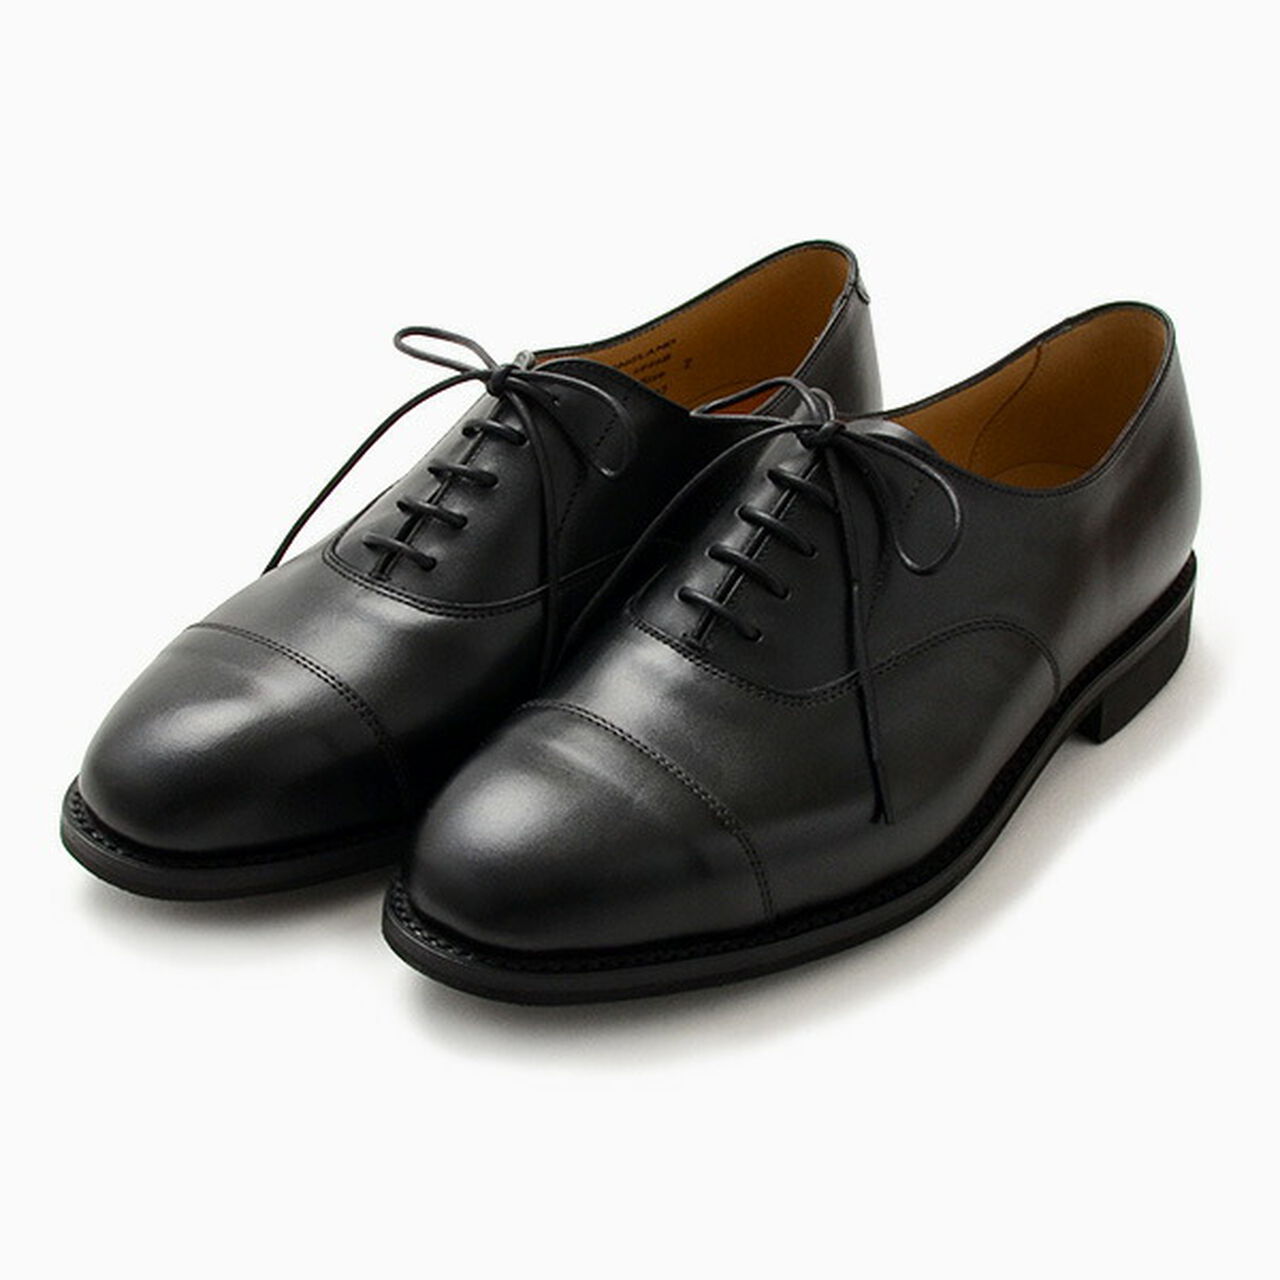 Cap Toe Oxford Leather Shoes,Black, large image number 0